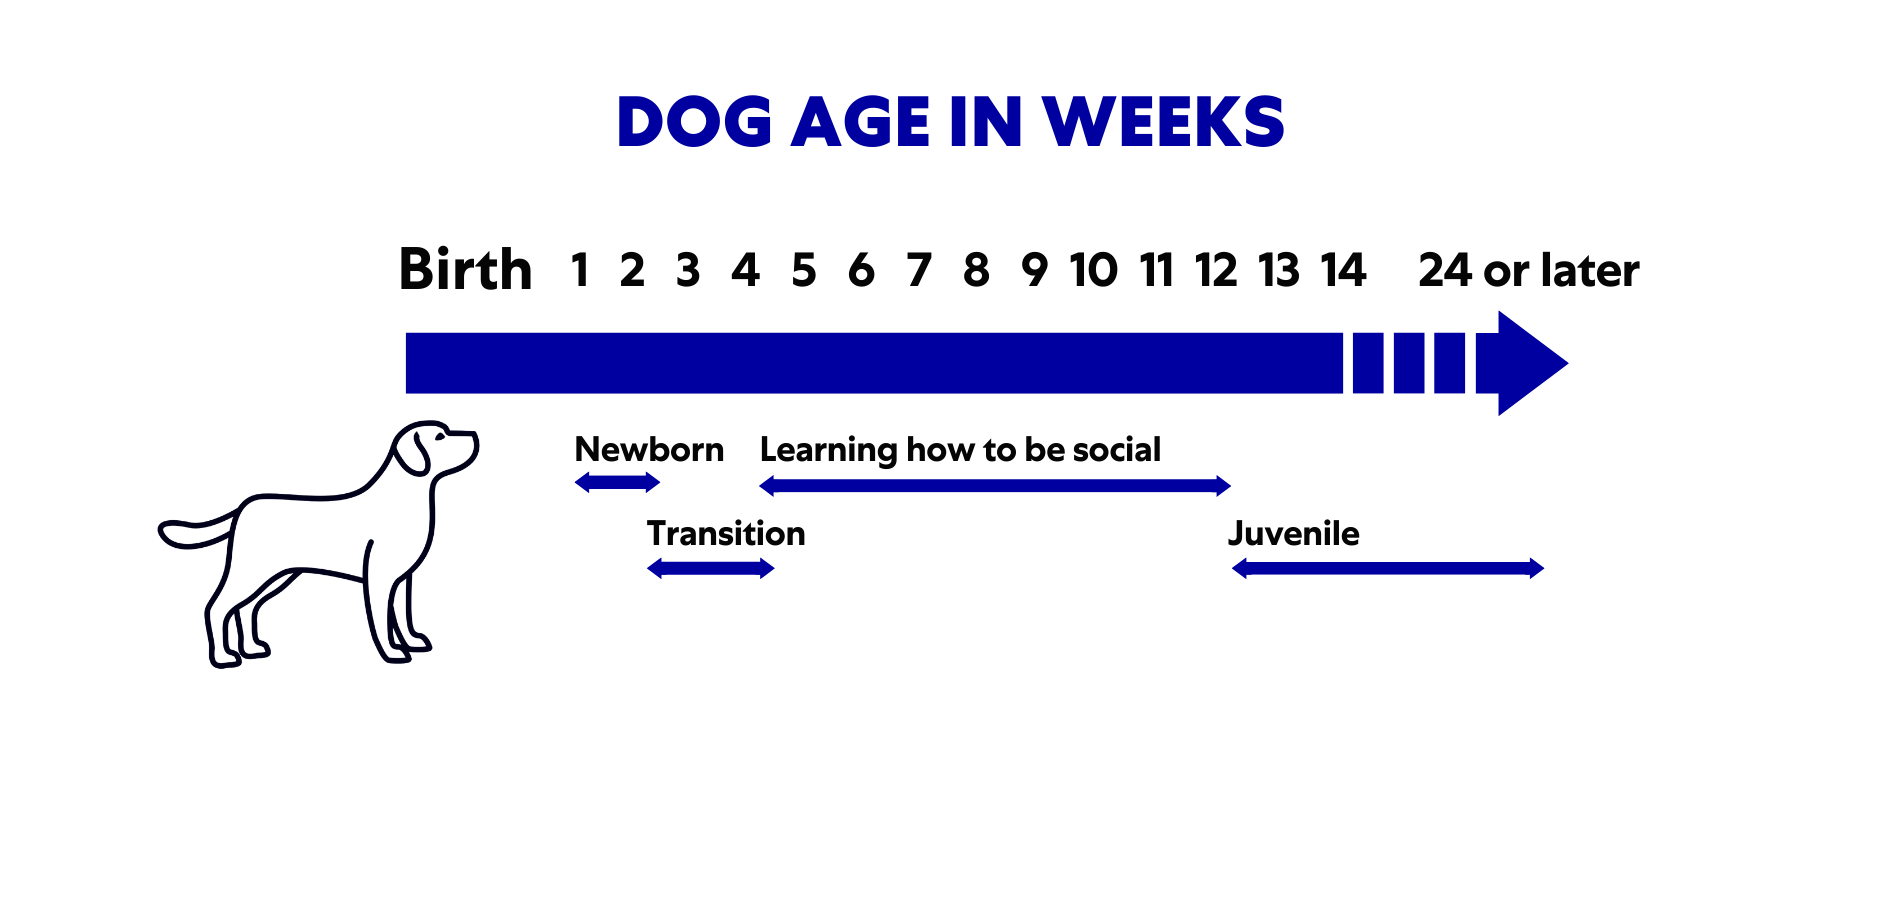 Dog age in weeks